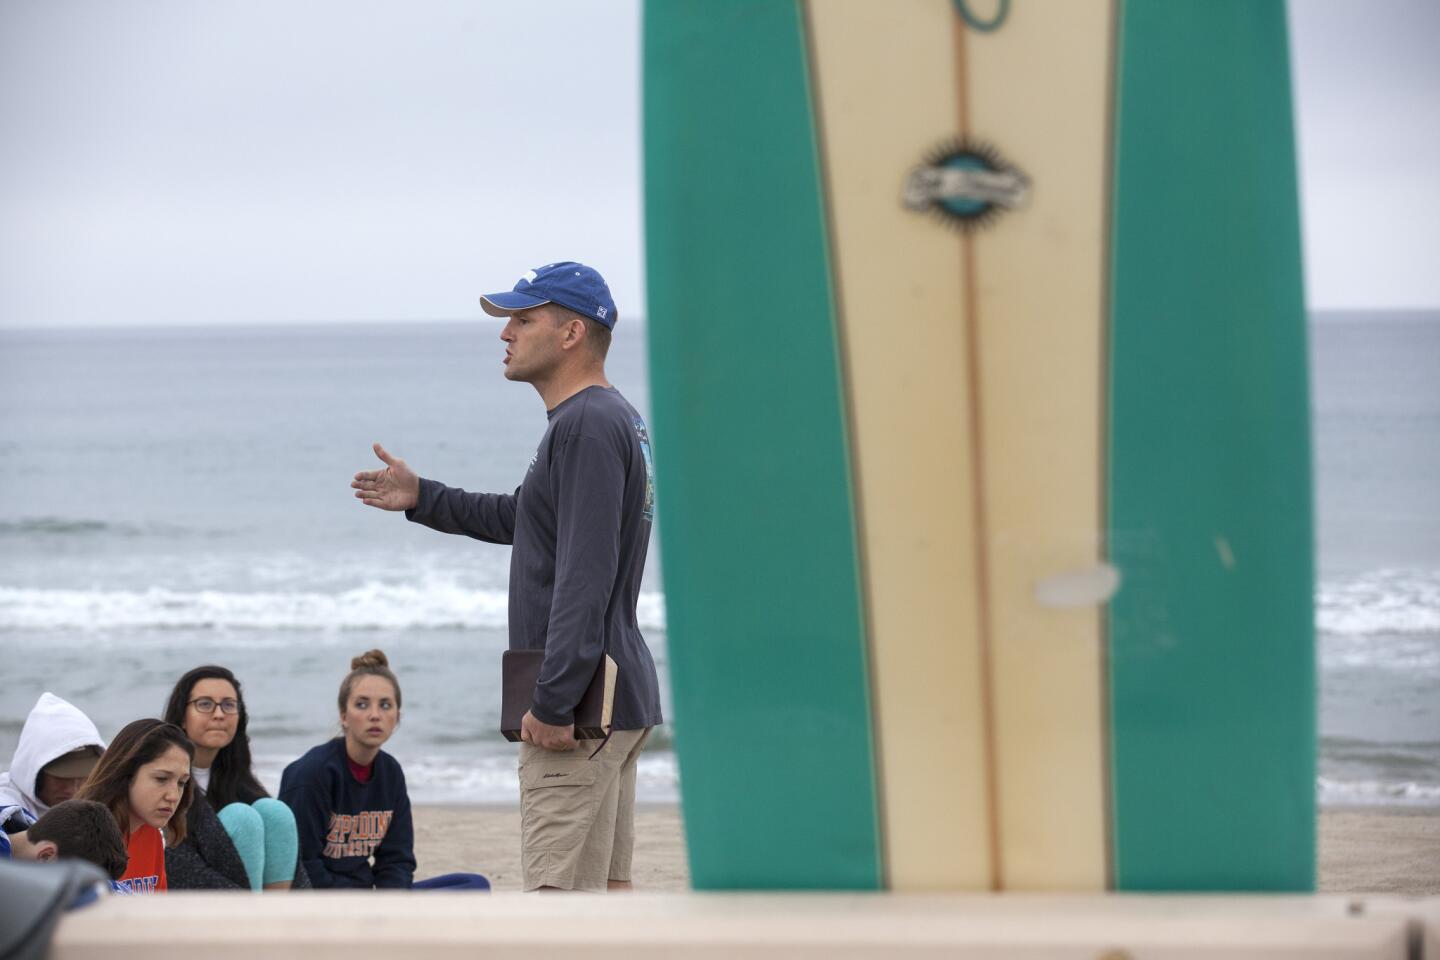 Students listen to a short morning sermon by Rob Shearer at Pepperdine's Surf Chapel on Zuma Beach. Shearer is an assistant professor at the university.